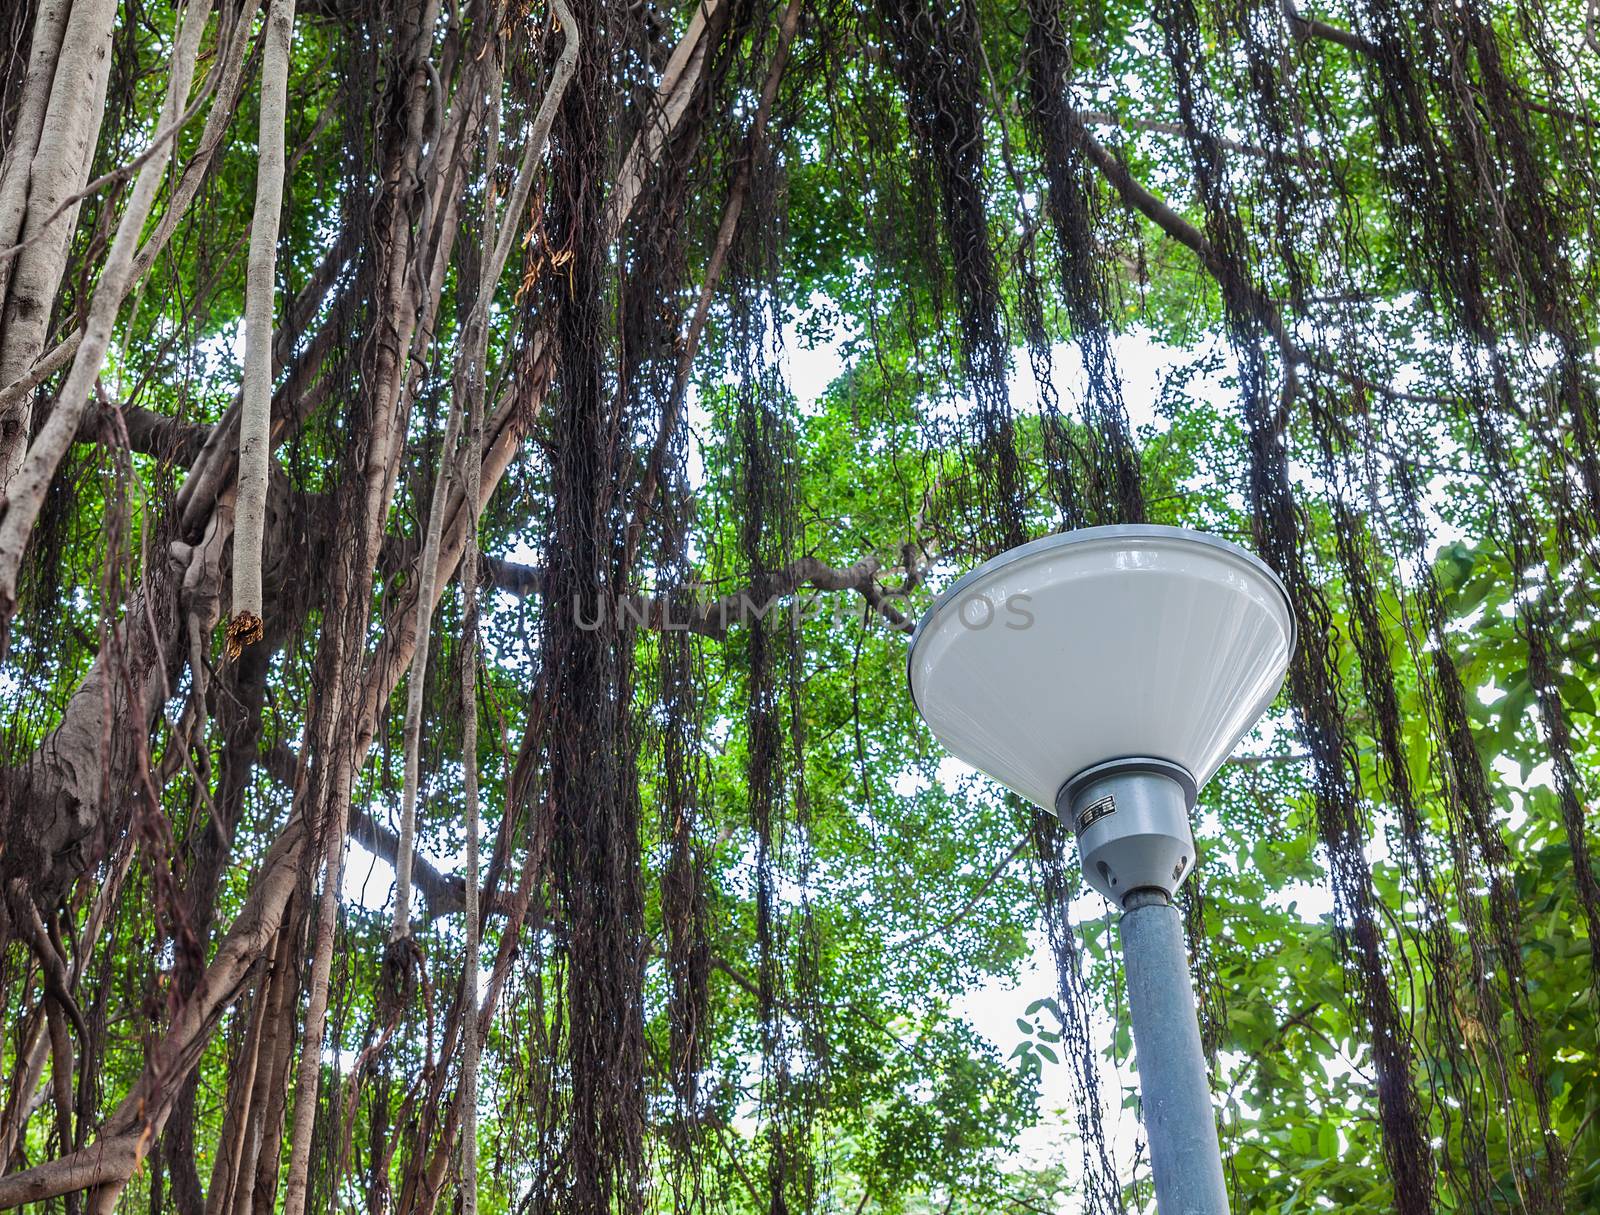 Lamp pillar under Branch of a banyan tree with long vine from top to ground